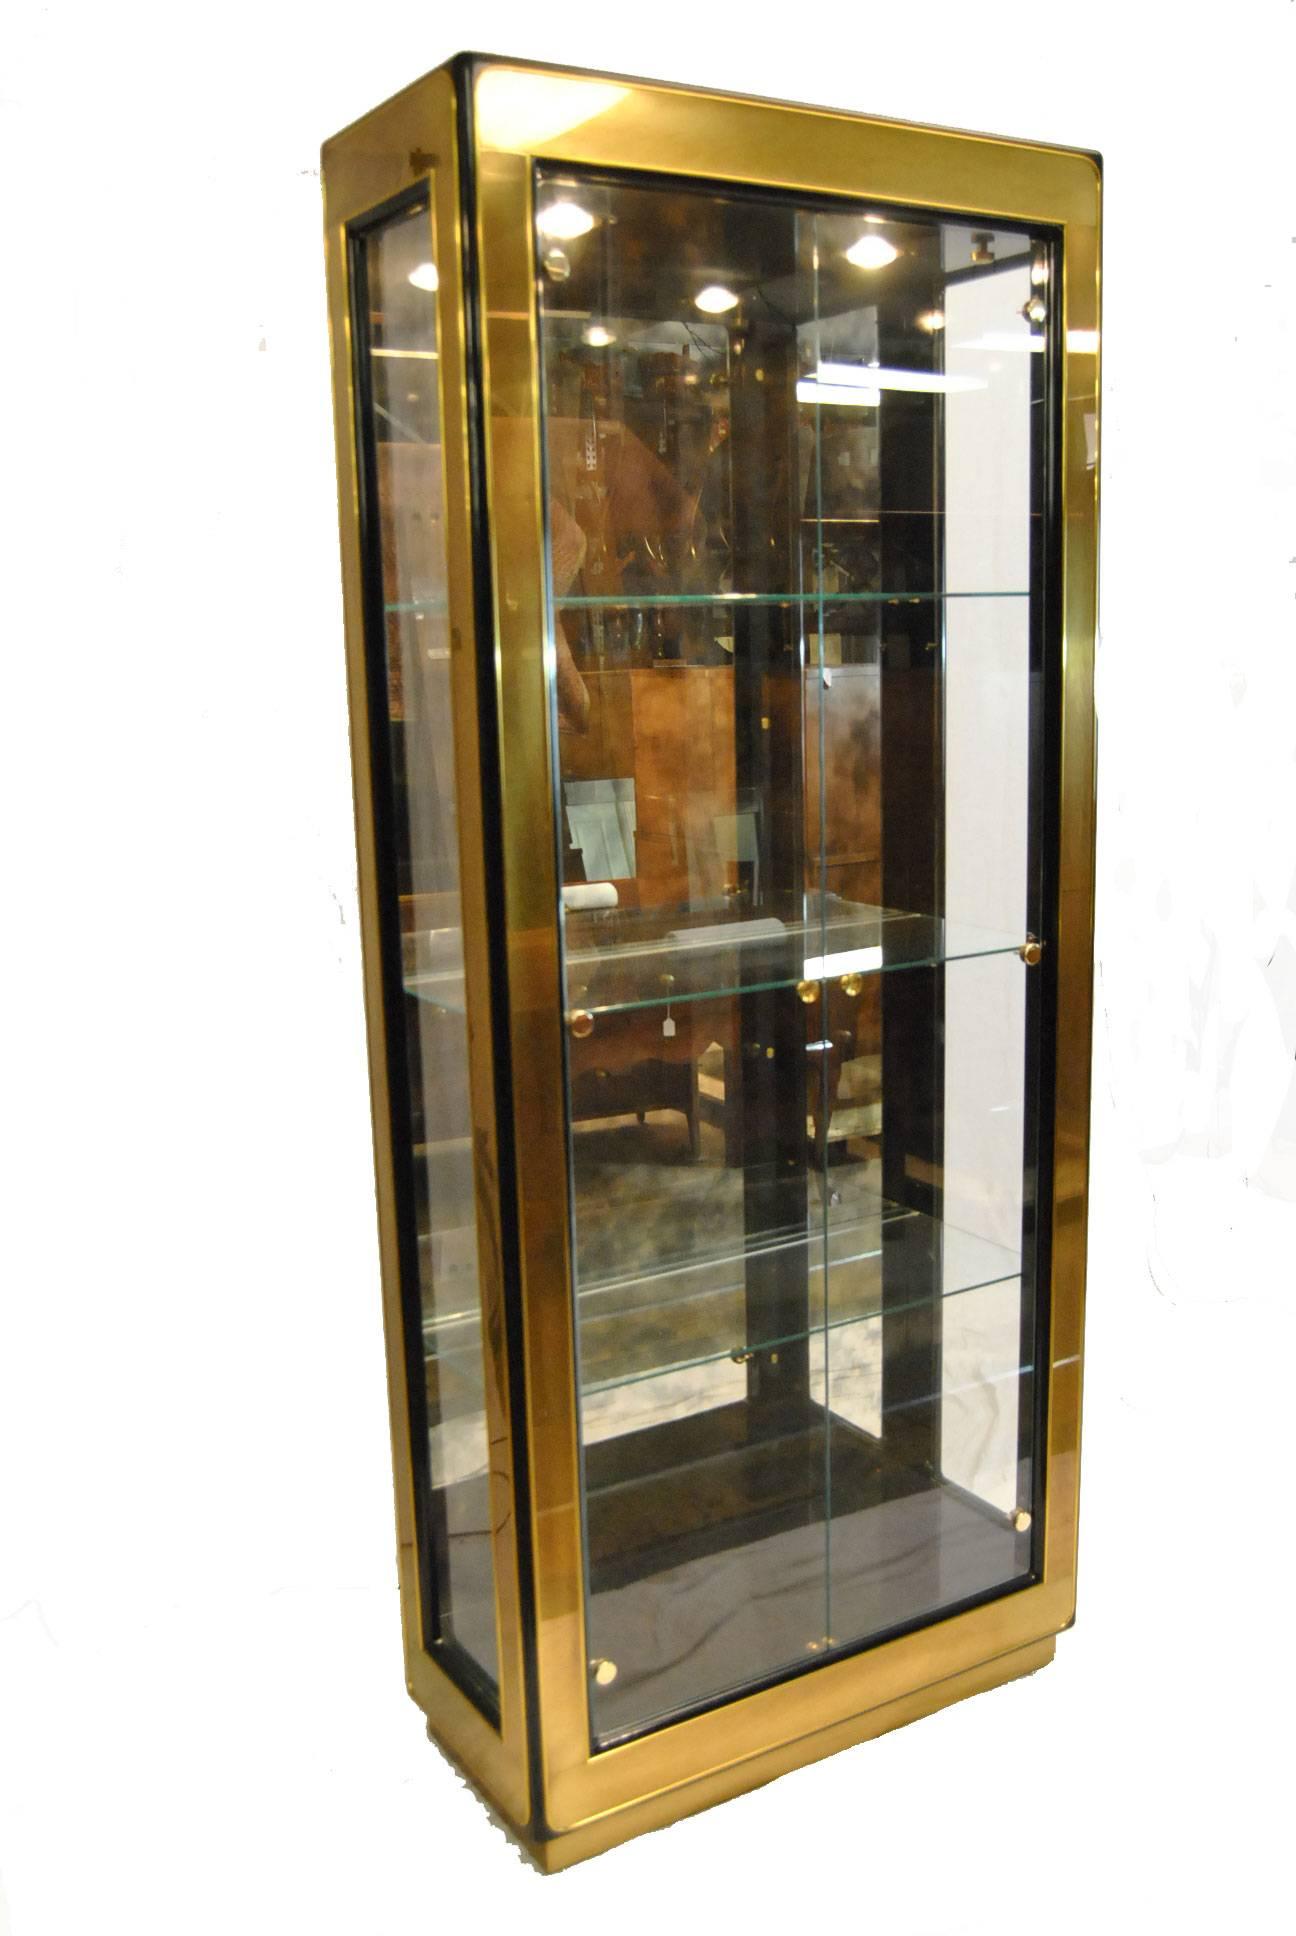 A stunning curio display cabinet by Mastercraft Furniture. This beautiful cabinet features a burnished brass over a black lacquered frame, three adjustable shelves with plate grooves, lights and a distressed smoked mirror on the back interior.